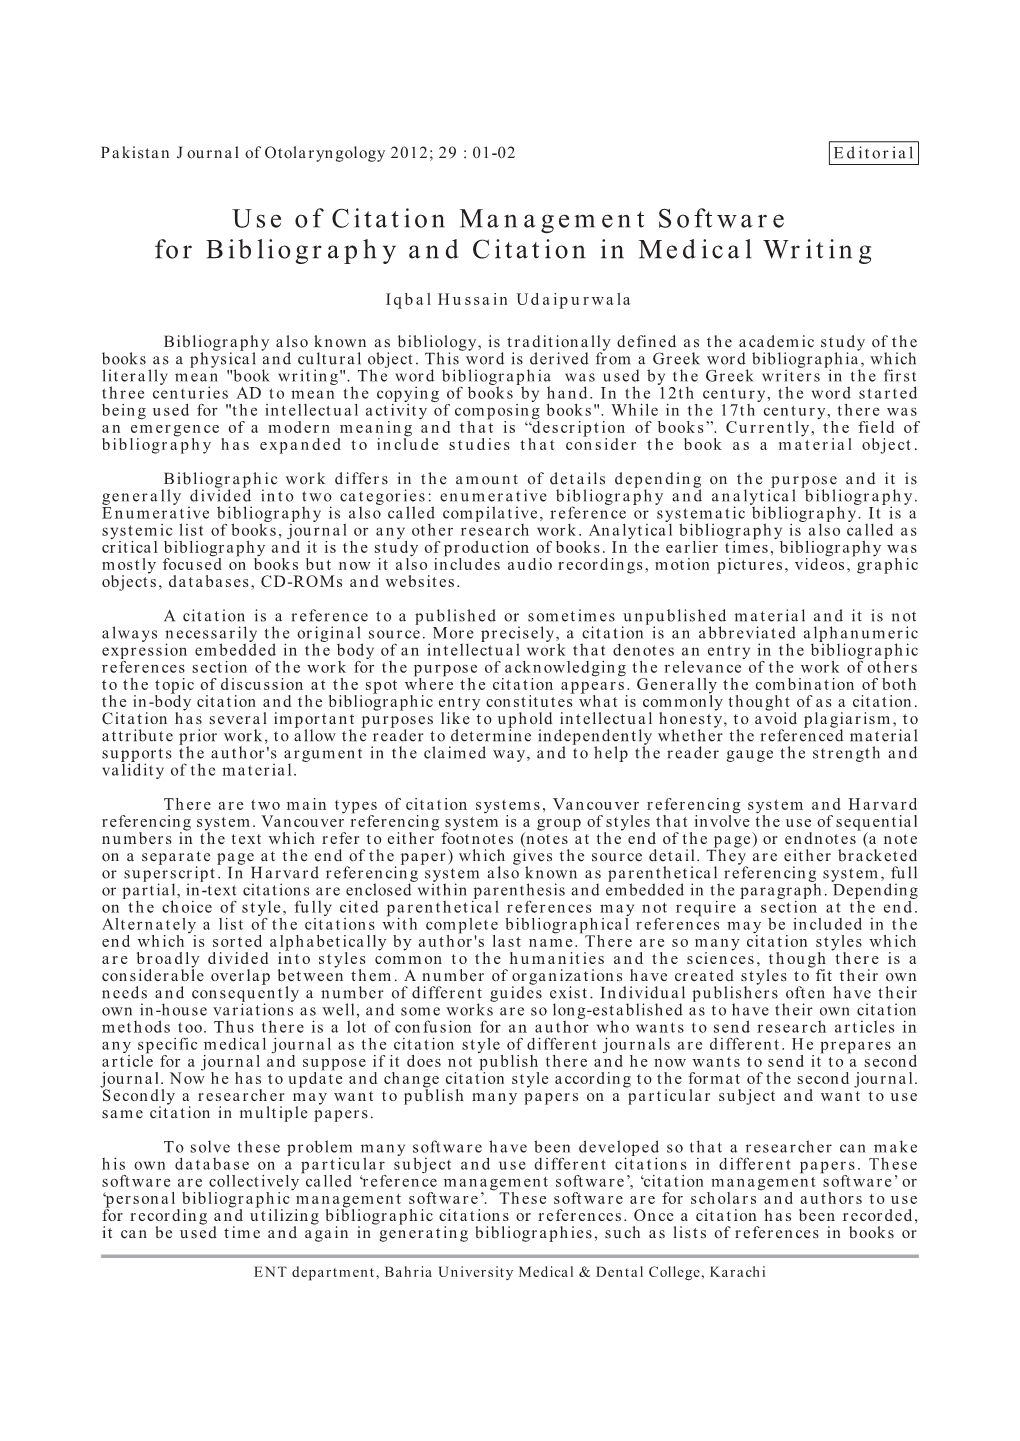 Use of Citation Management Software for Bibliography and Citation in Medical Writing